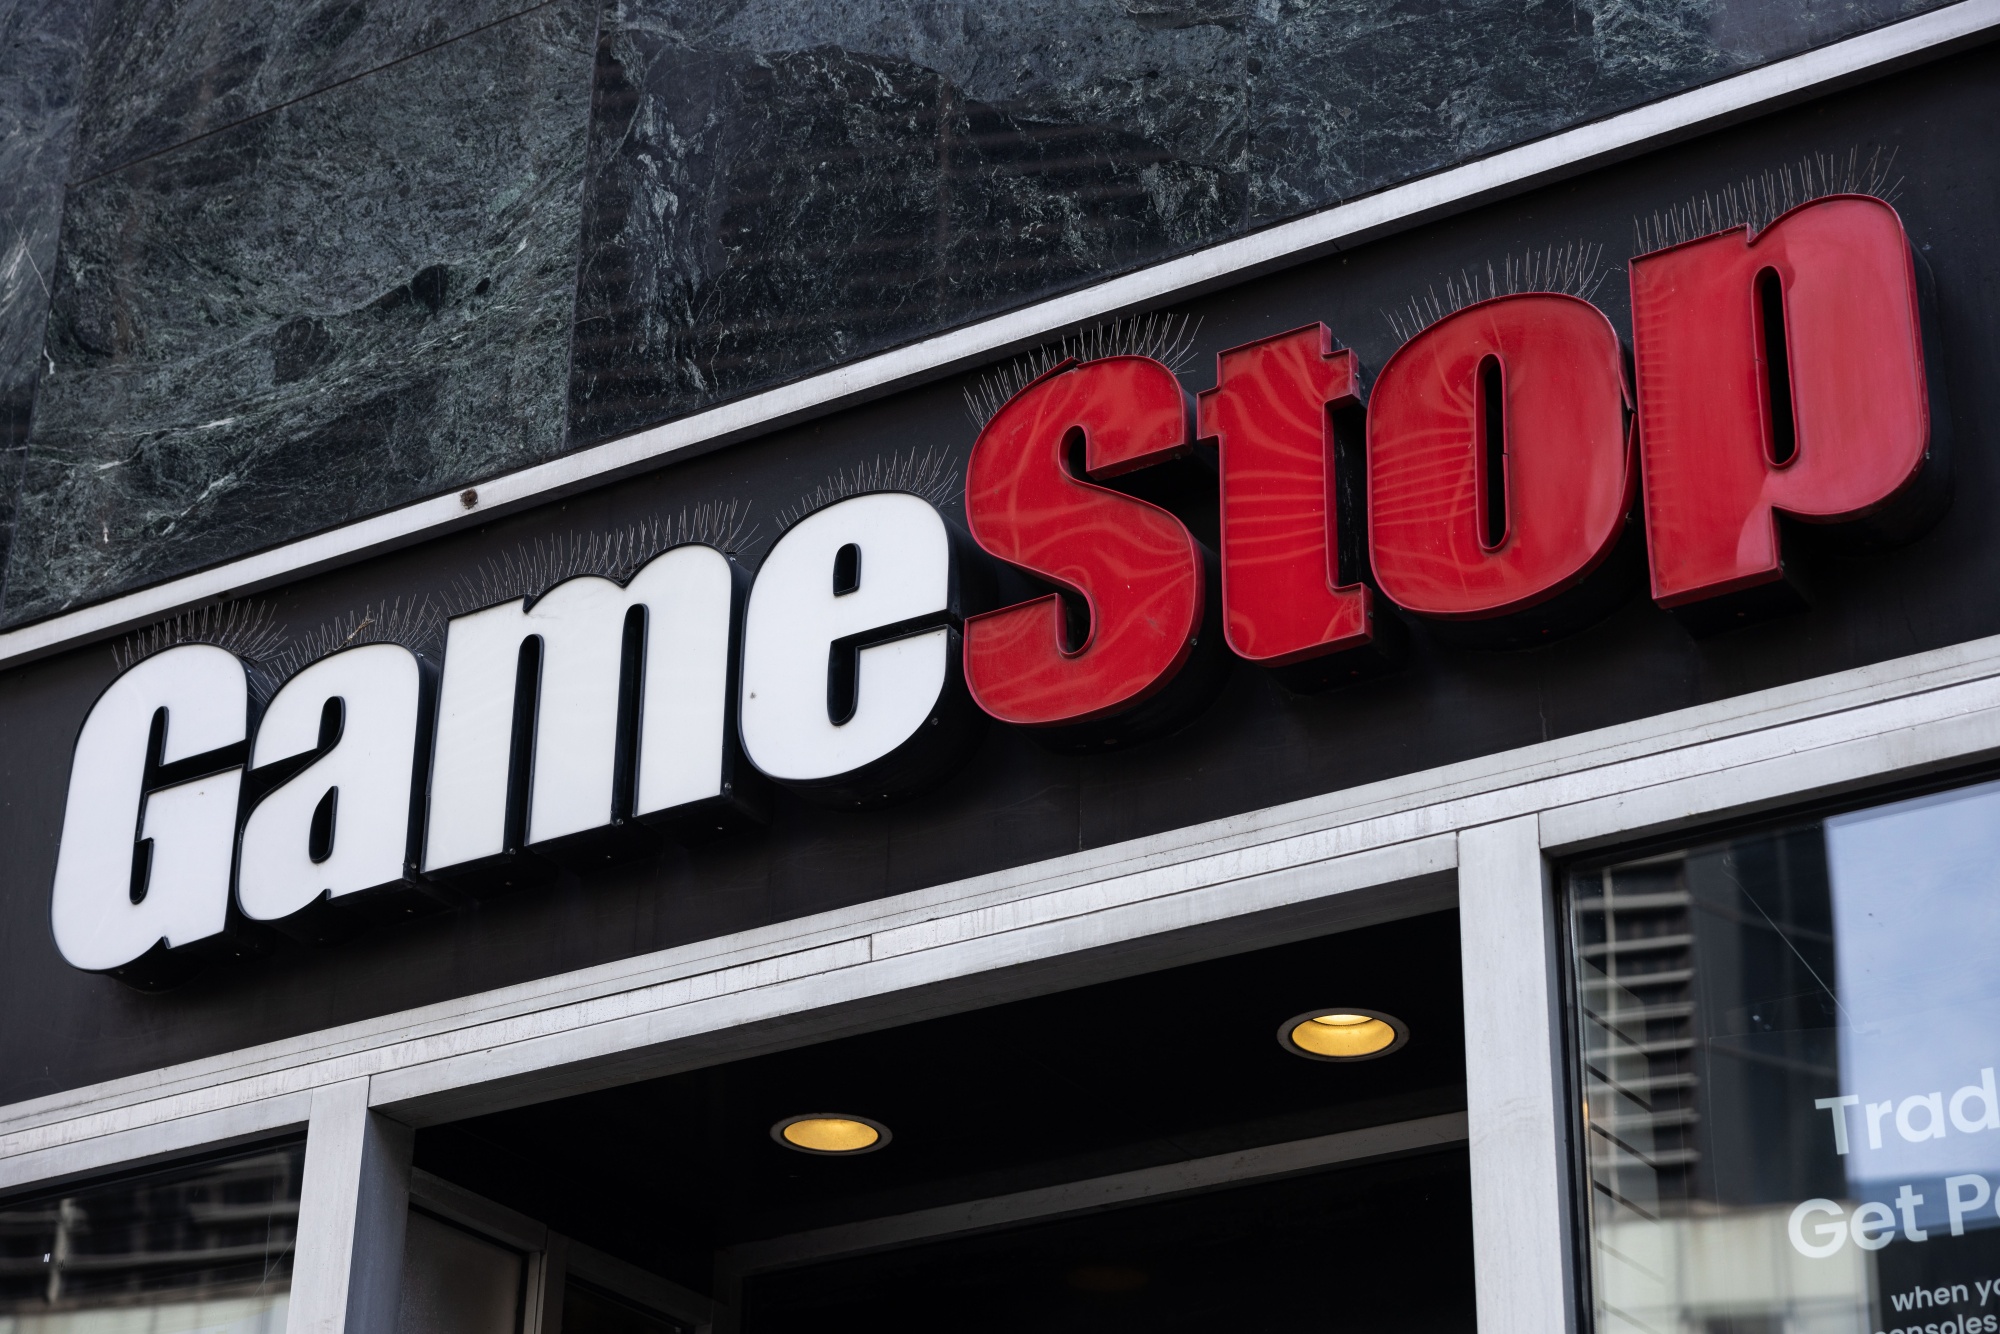 Meme Stocks: The GameStop Short Squeeze Is Now a Movie - Bloomberg